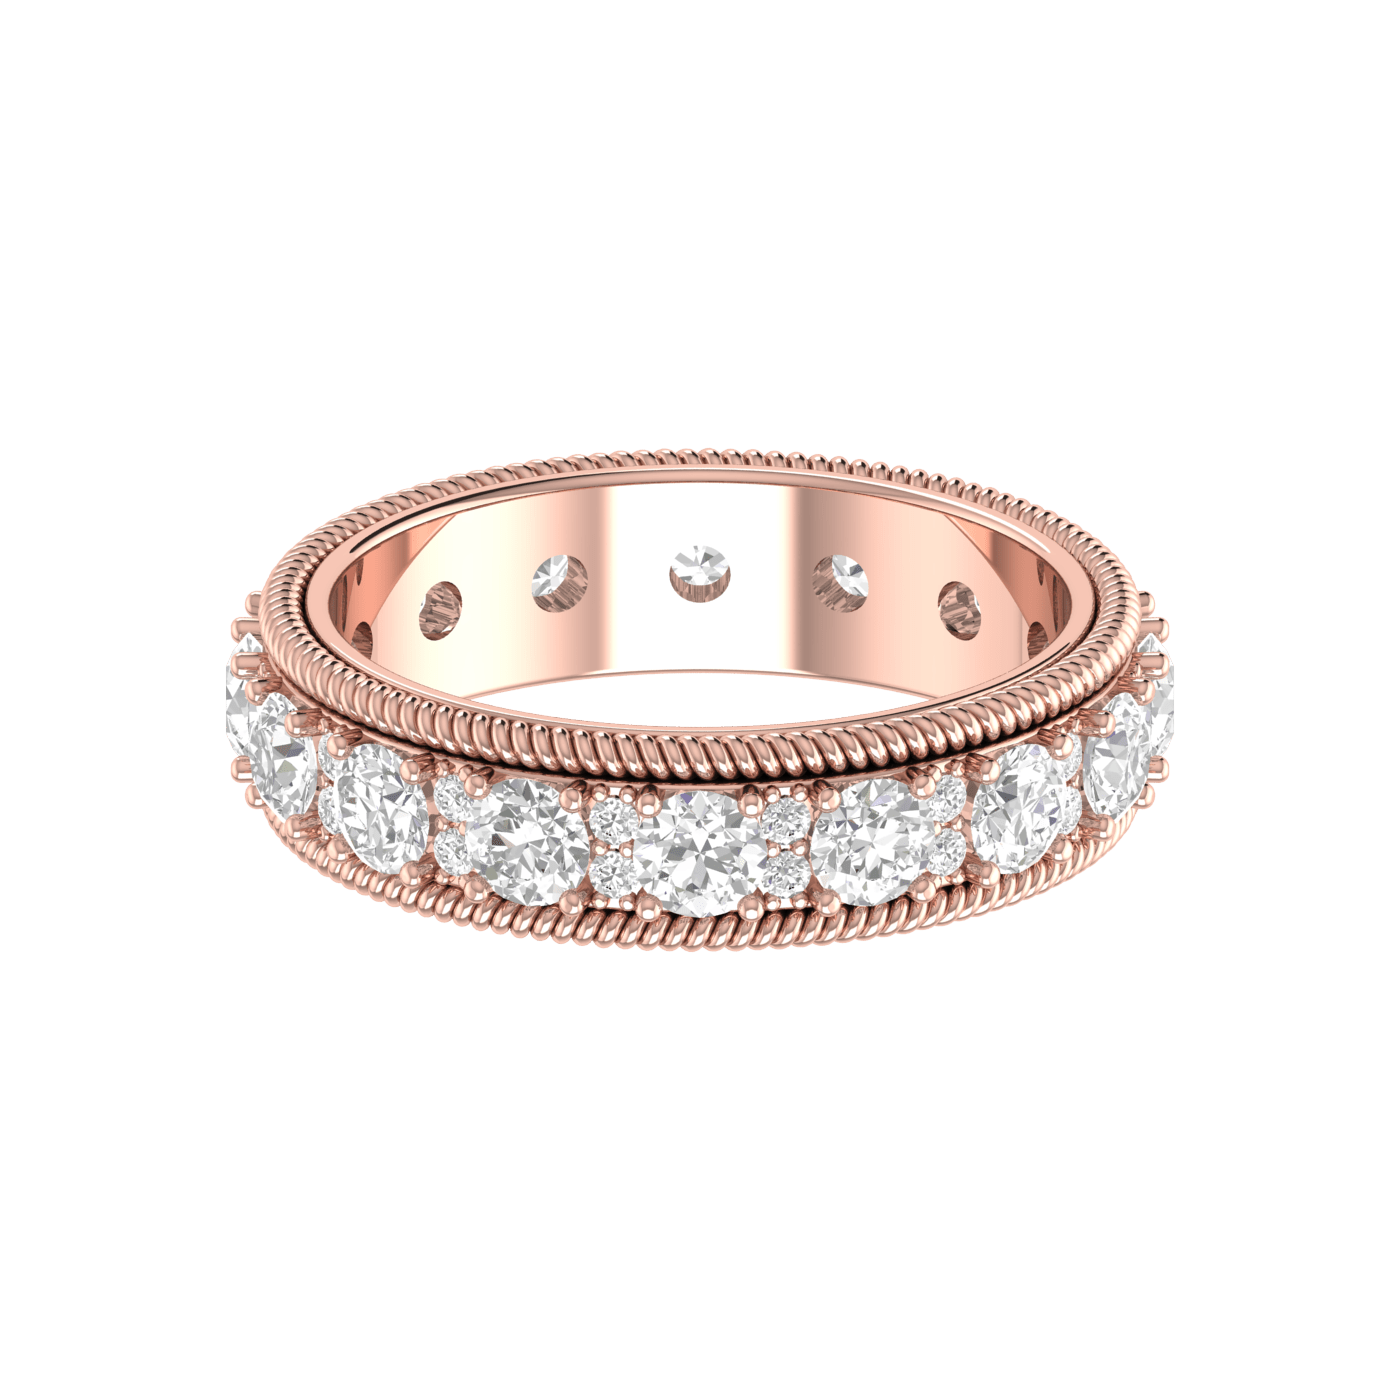 11 Questions to Ask Before You Buy an Eternity Ring – RockHer.com